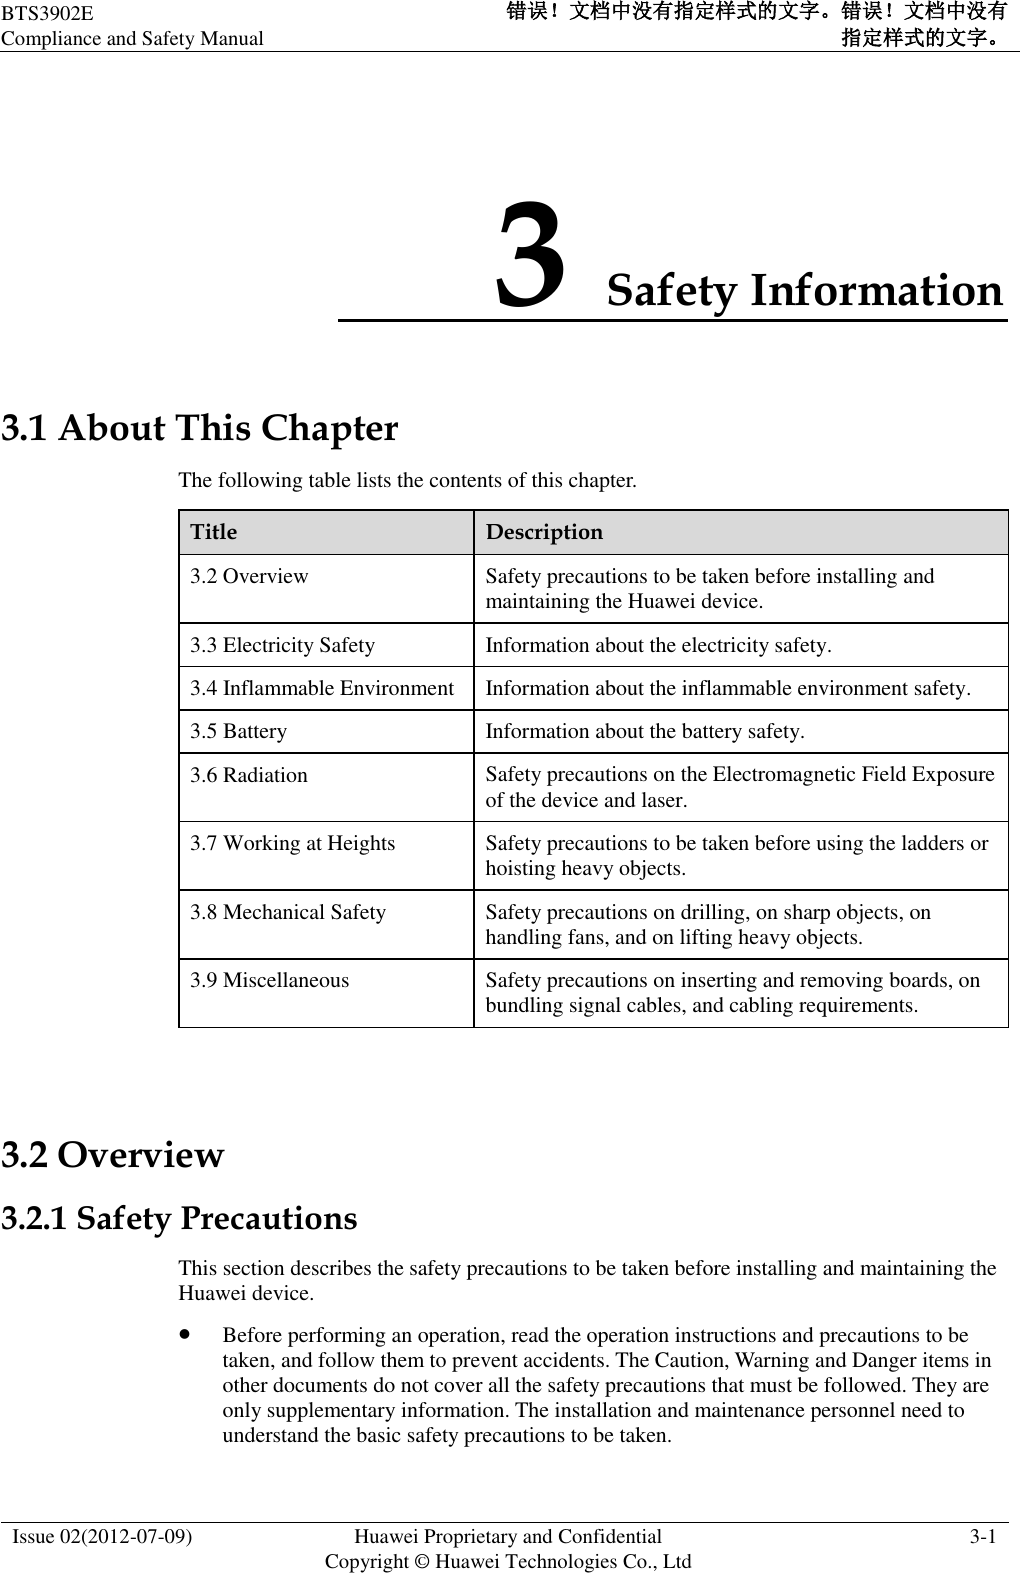 BTS3902E Compliance and Safety Manual 错误！文档中没有指定样式的文字。错误！文档中没有指定样式的文字。  Issue 02(2012-07-09) Huawei Proprietary and Confidential           Copyright © Huawei Technologies Co., Ltd 3-1  3 Safety Information 3.1 About This Chapter The following table lists the contents of this chapter. Title Description 3.2 Overview Safety precautions to be taken before installing and maintaining the Huawei device. 3.3 Electricity Safety Information about the electricity safety. 3.4 Inflammable Environment Information about the inflammable environment safety. 3.5 Battery Information about the battery safety. 3.6 Radiation Safety precautions on the Electromagnetic Field Exposure of the device and laser. 3.7 Working at Heights Safety precautions to be taken before using the ladders or hoisting heavy objects. 3.8 Mechanical Safety Safety precautions on drilling, on sharp objects, on handling fans, and on lifting heavy objects. 3.9 Miscellaneous Safety precautions on inserting and removing boards, on bundling signal cables, and cabling requirements.  3.2 Overview 3.2.1 Safety Precautions This section describes the safety precautions to be taken before installing and maintaining the Huawei device.  Before performing an operation, read the operation instructions and precautions to be taken, and follow them to prevent accidents. The Caution, Warning and Danger items in other documents do not cover all the safety precautions that must be followed. They are only supplementary information. The installation and maintenance personnel need to understand the basic safety precautions to be taken. 